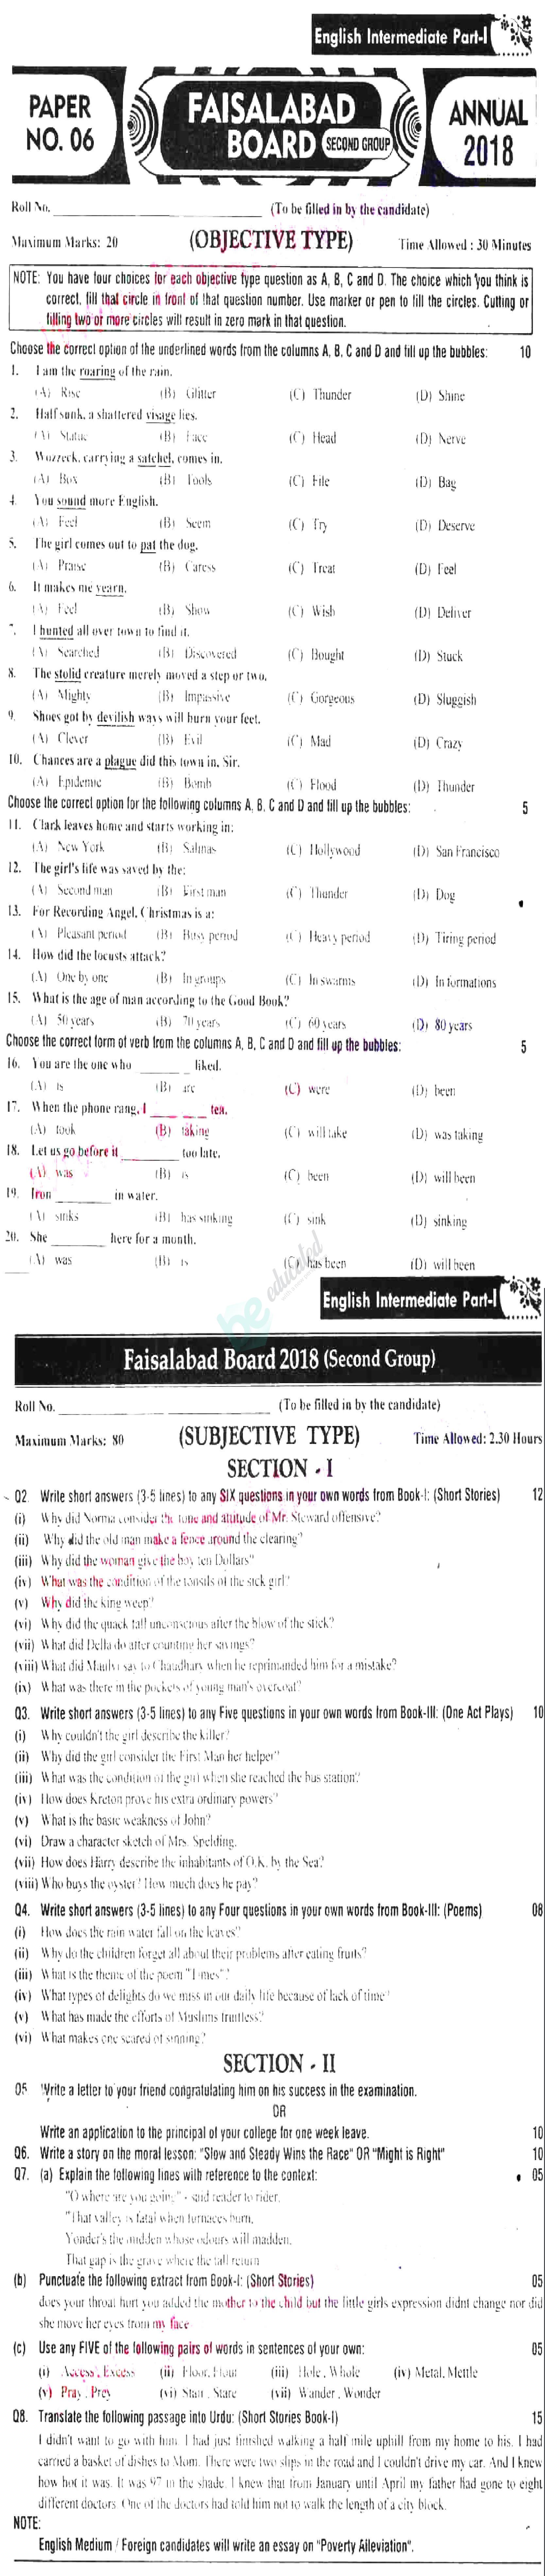 English 11th class Past Paper Group 2 BISE Faisalabad 2018